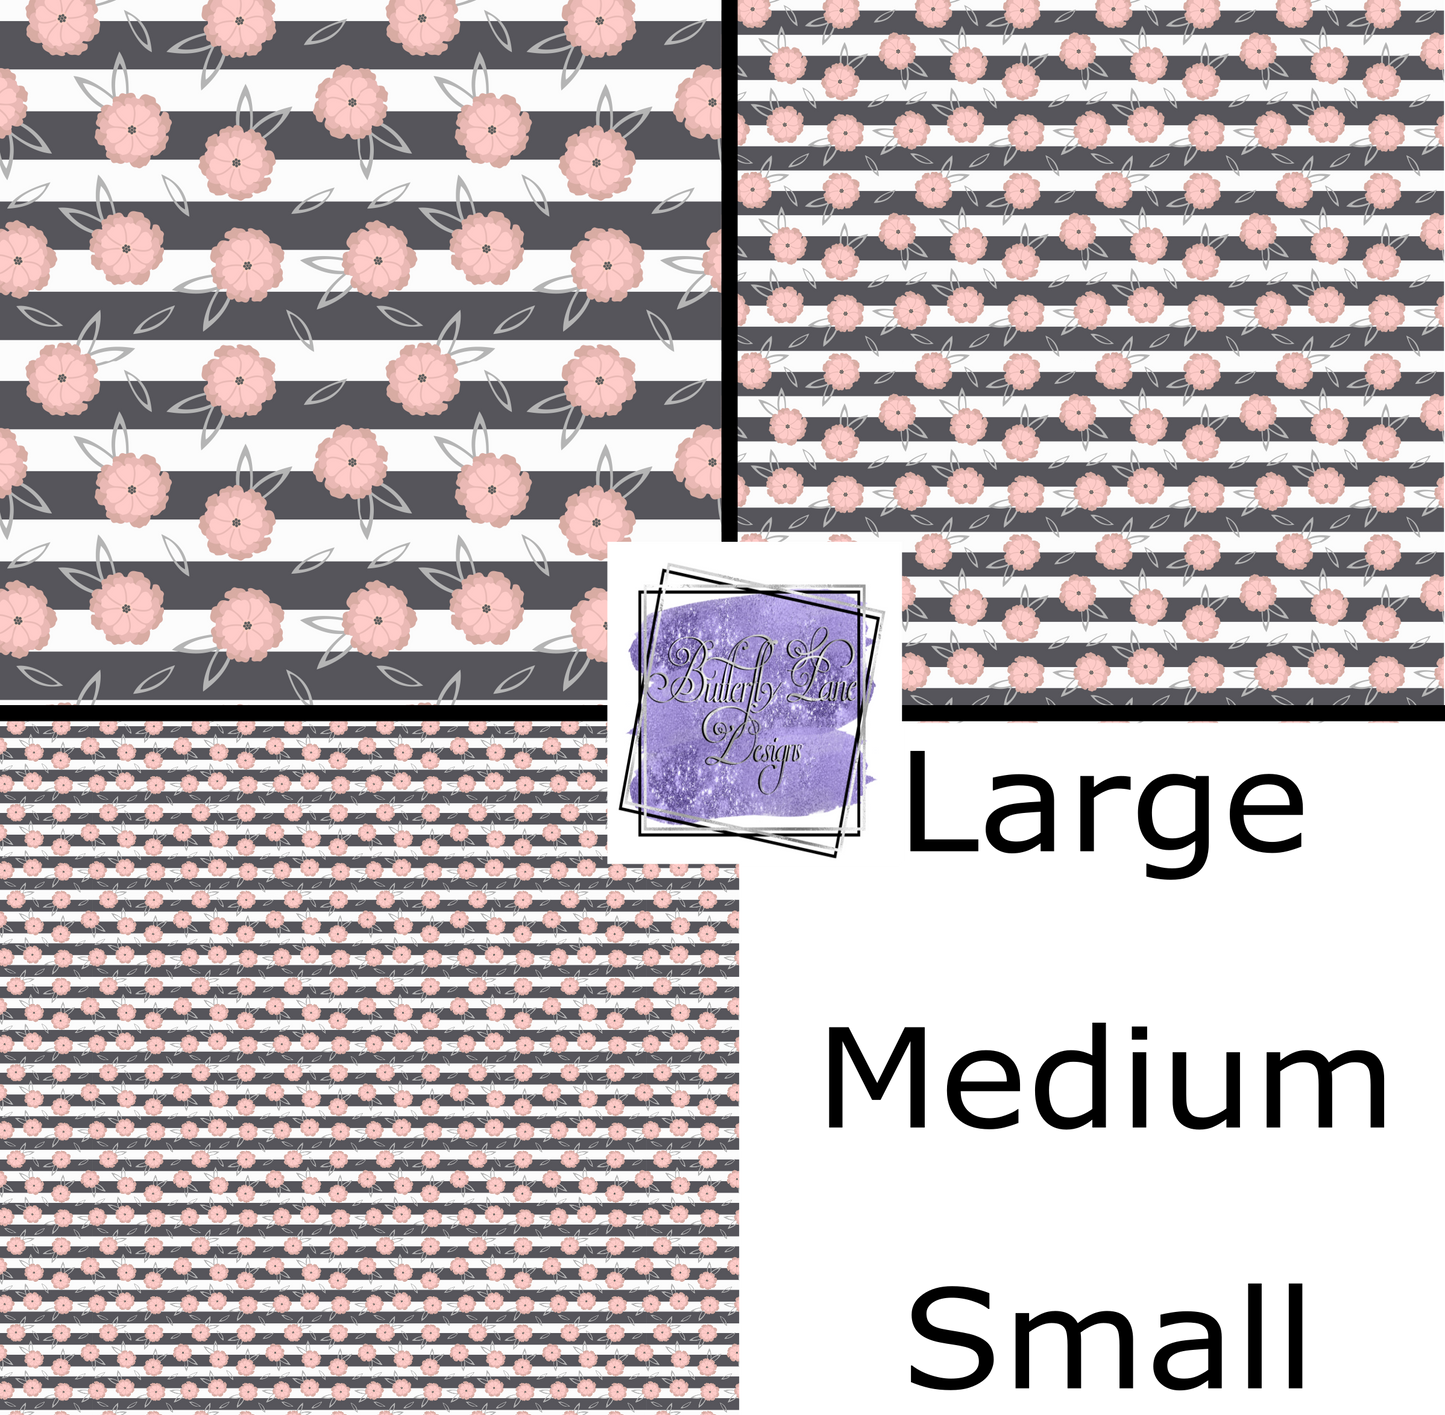 Dark Grey & White with Pink flowers 096 Patterned Vinyl